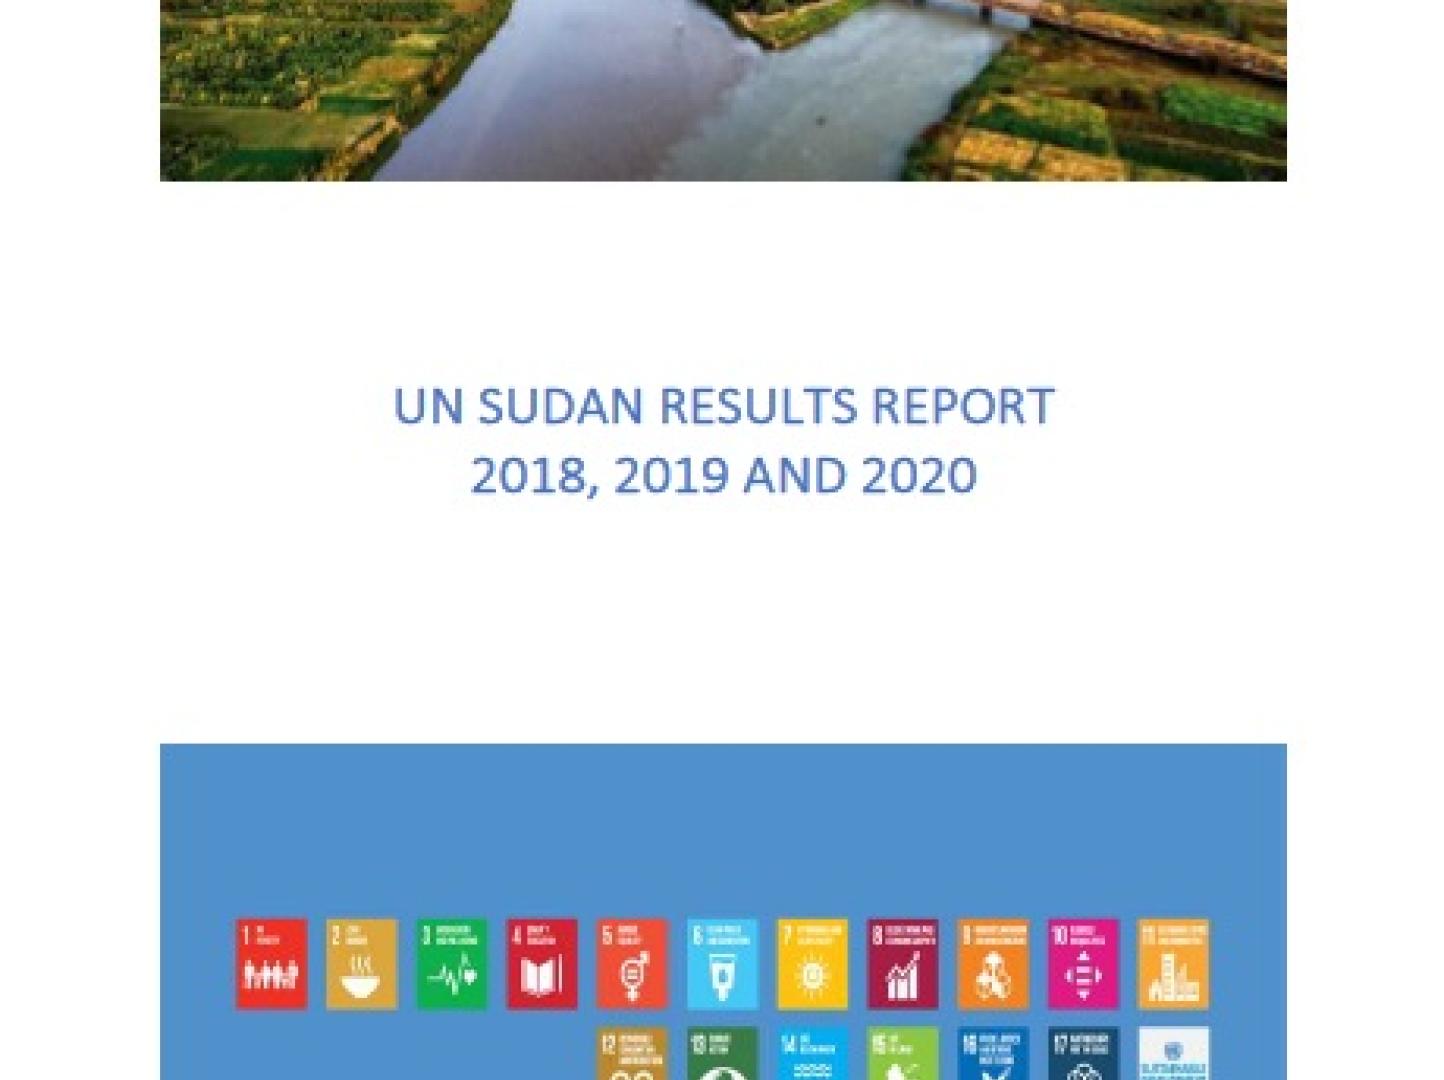 The United Nations Result Report for 2018, 2019 and 2020